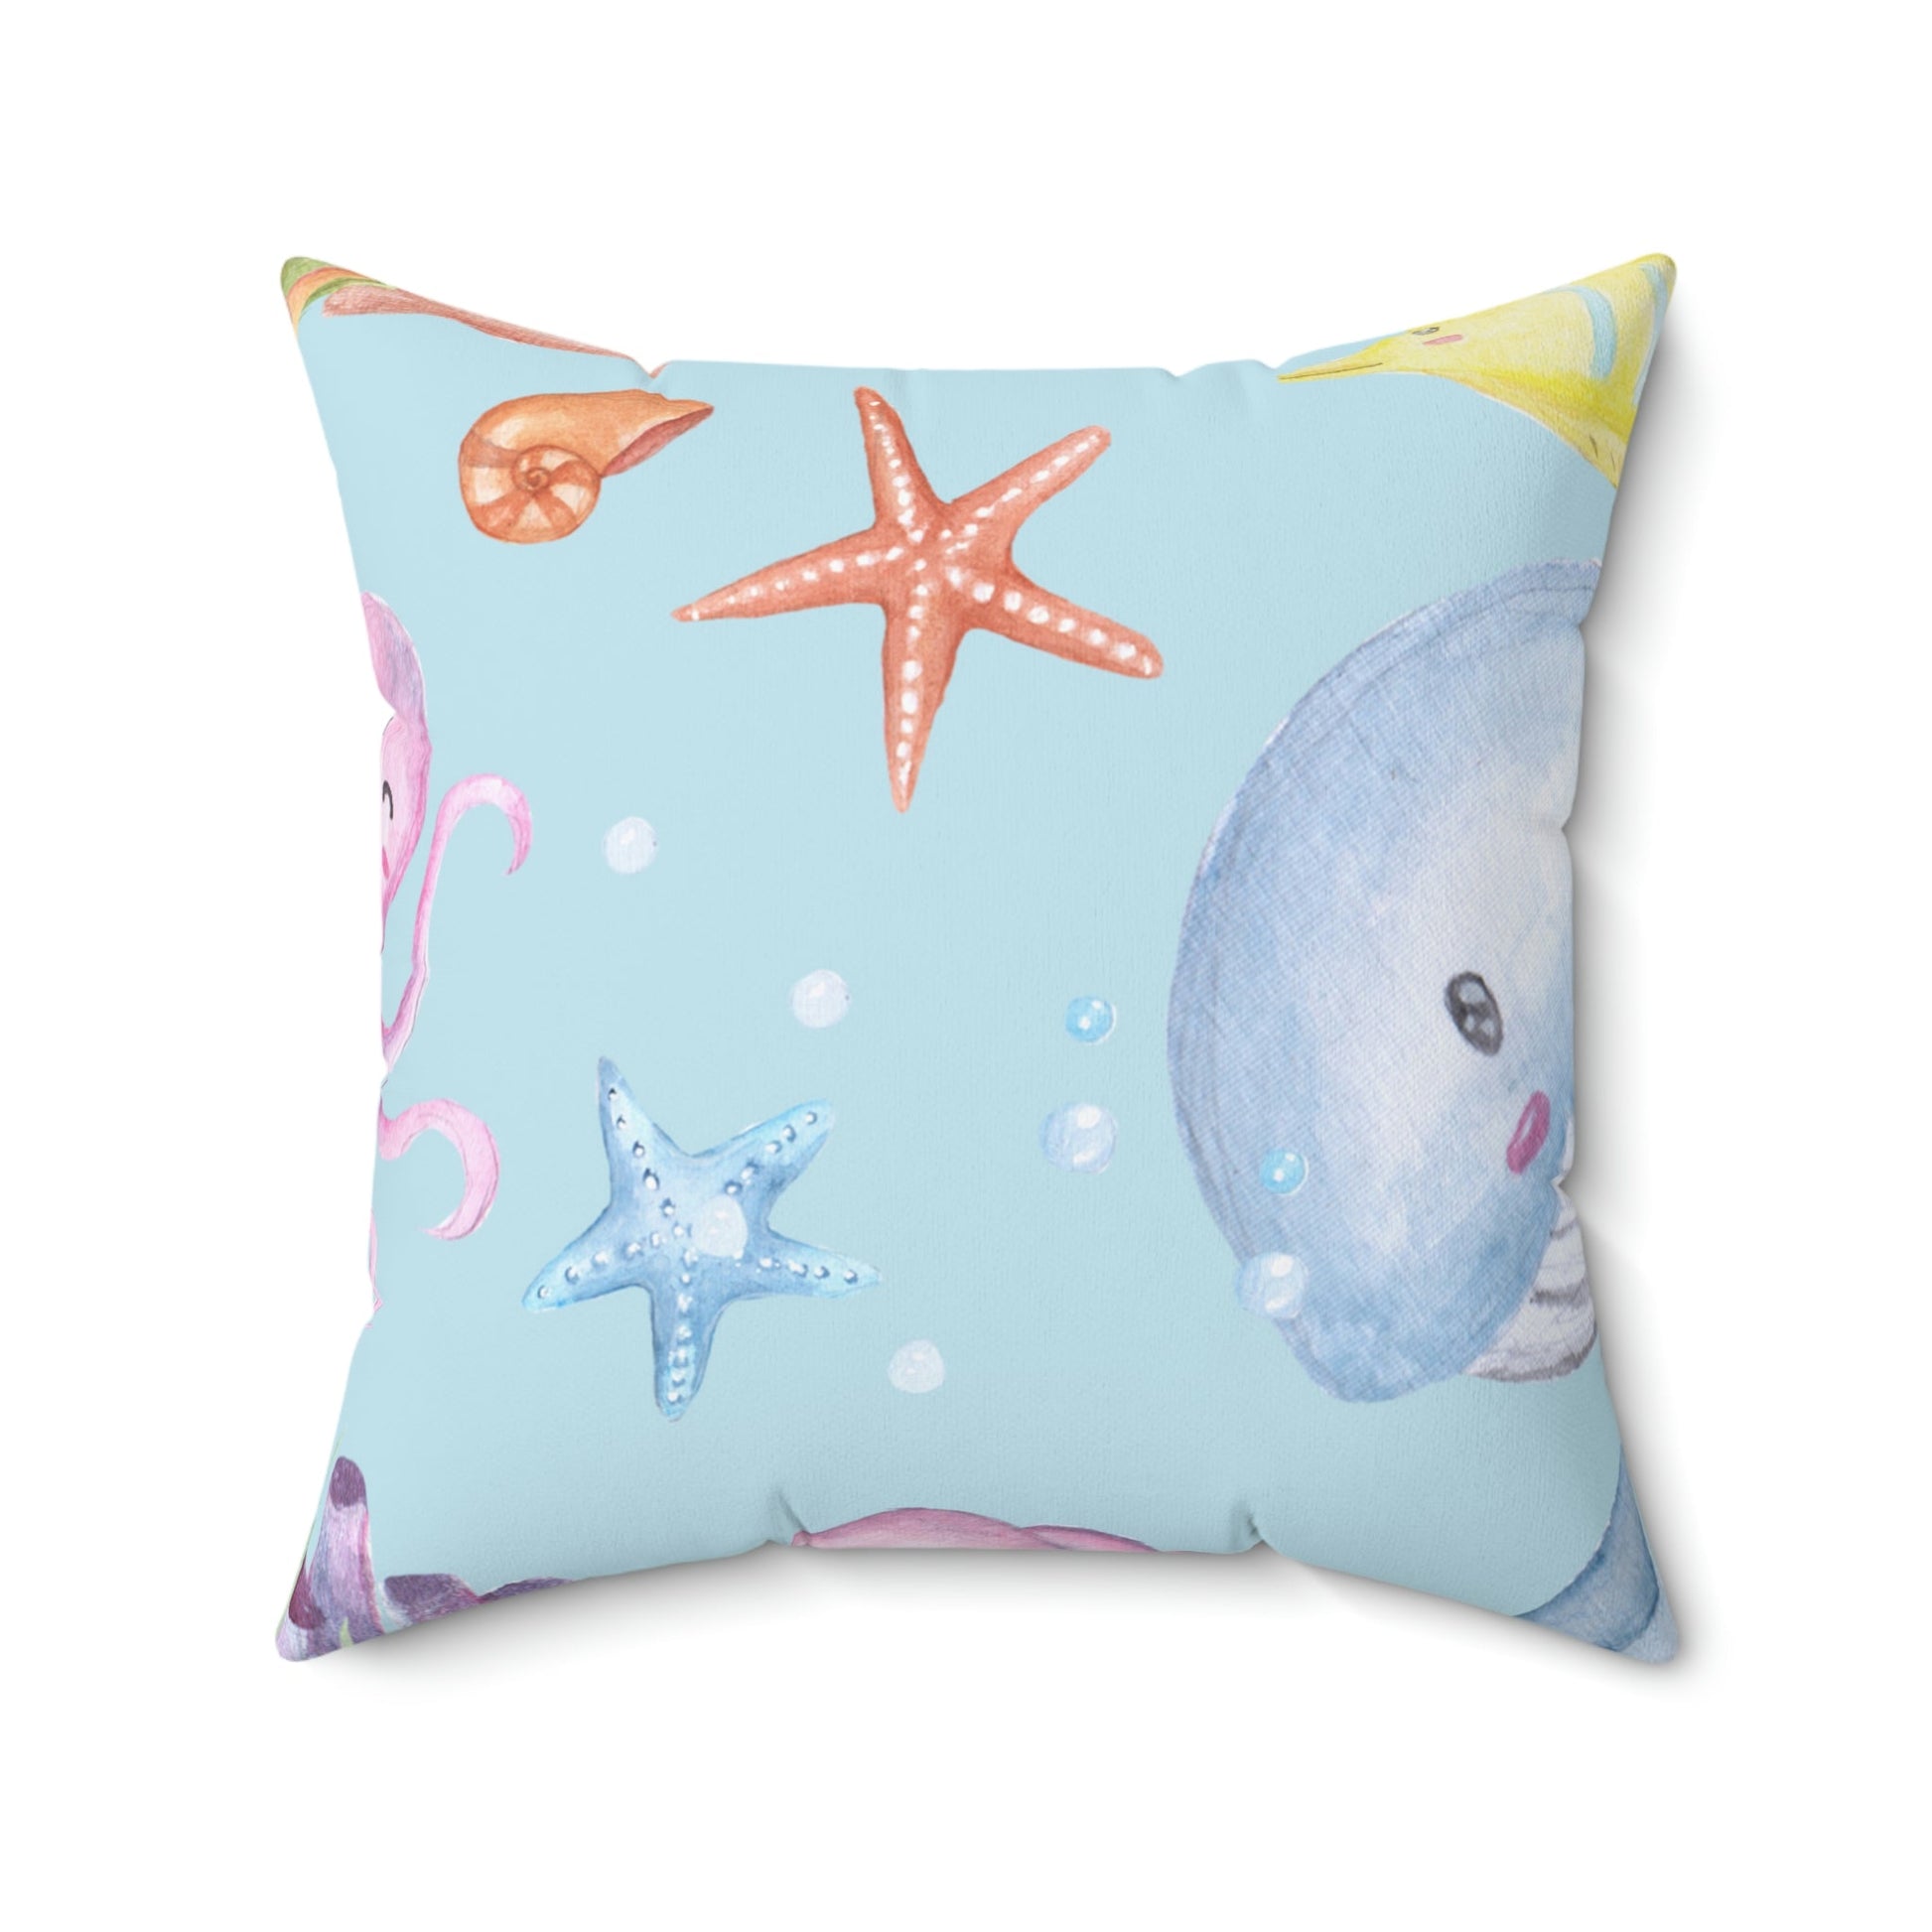 Under the Sea Square Pillow Home Decor Pink Sweetheart